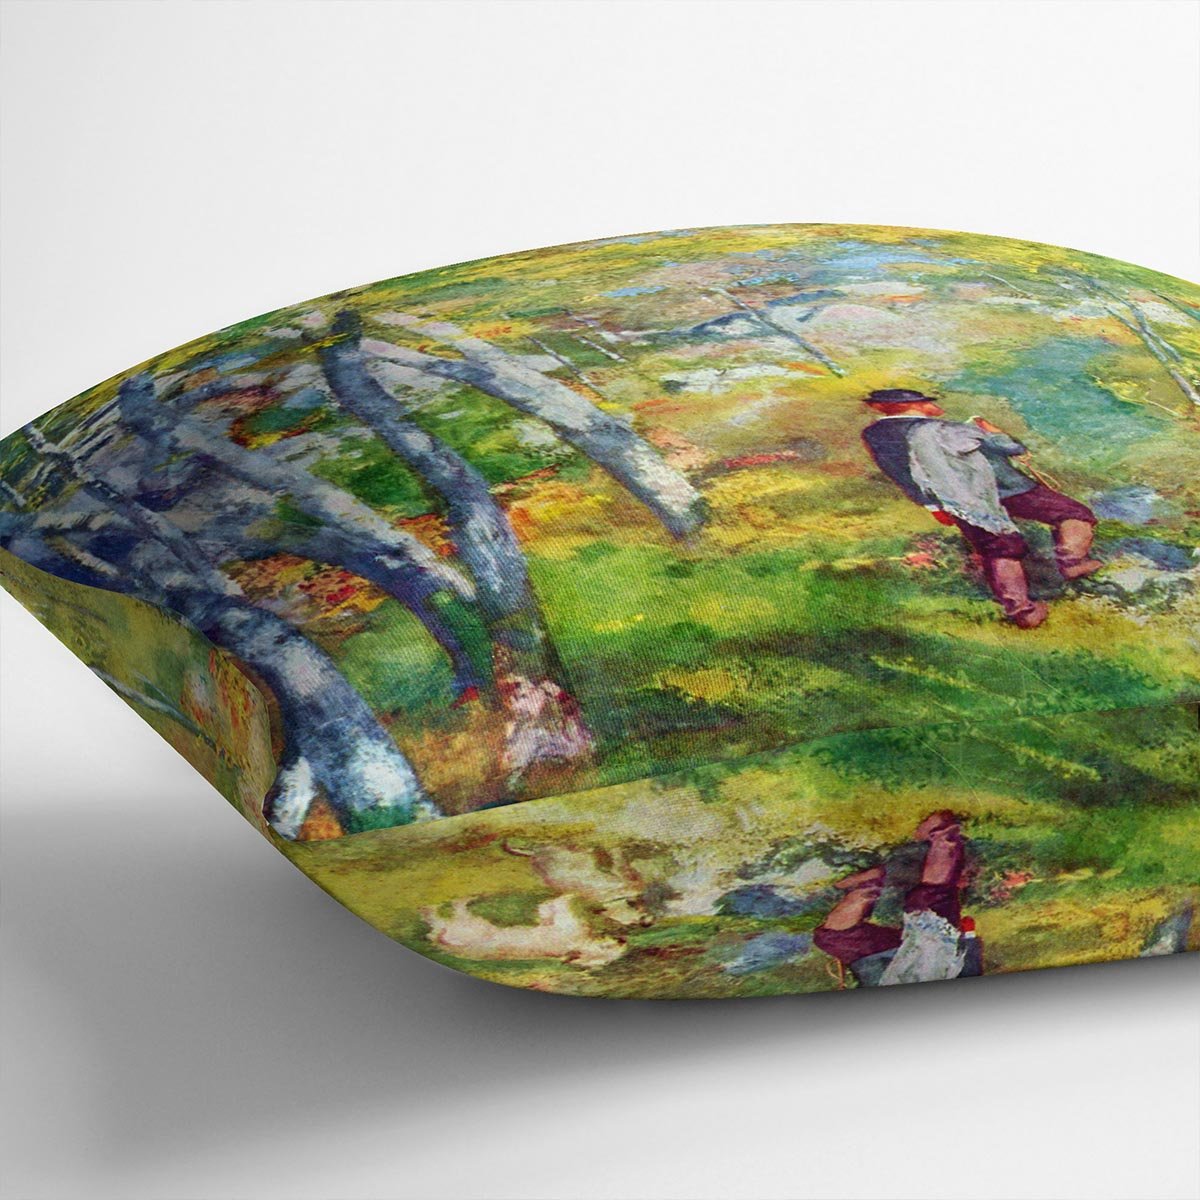 Young man in the forest of Fontainebleau by Renoir Throw Pillow